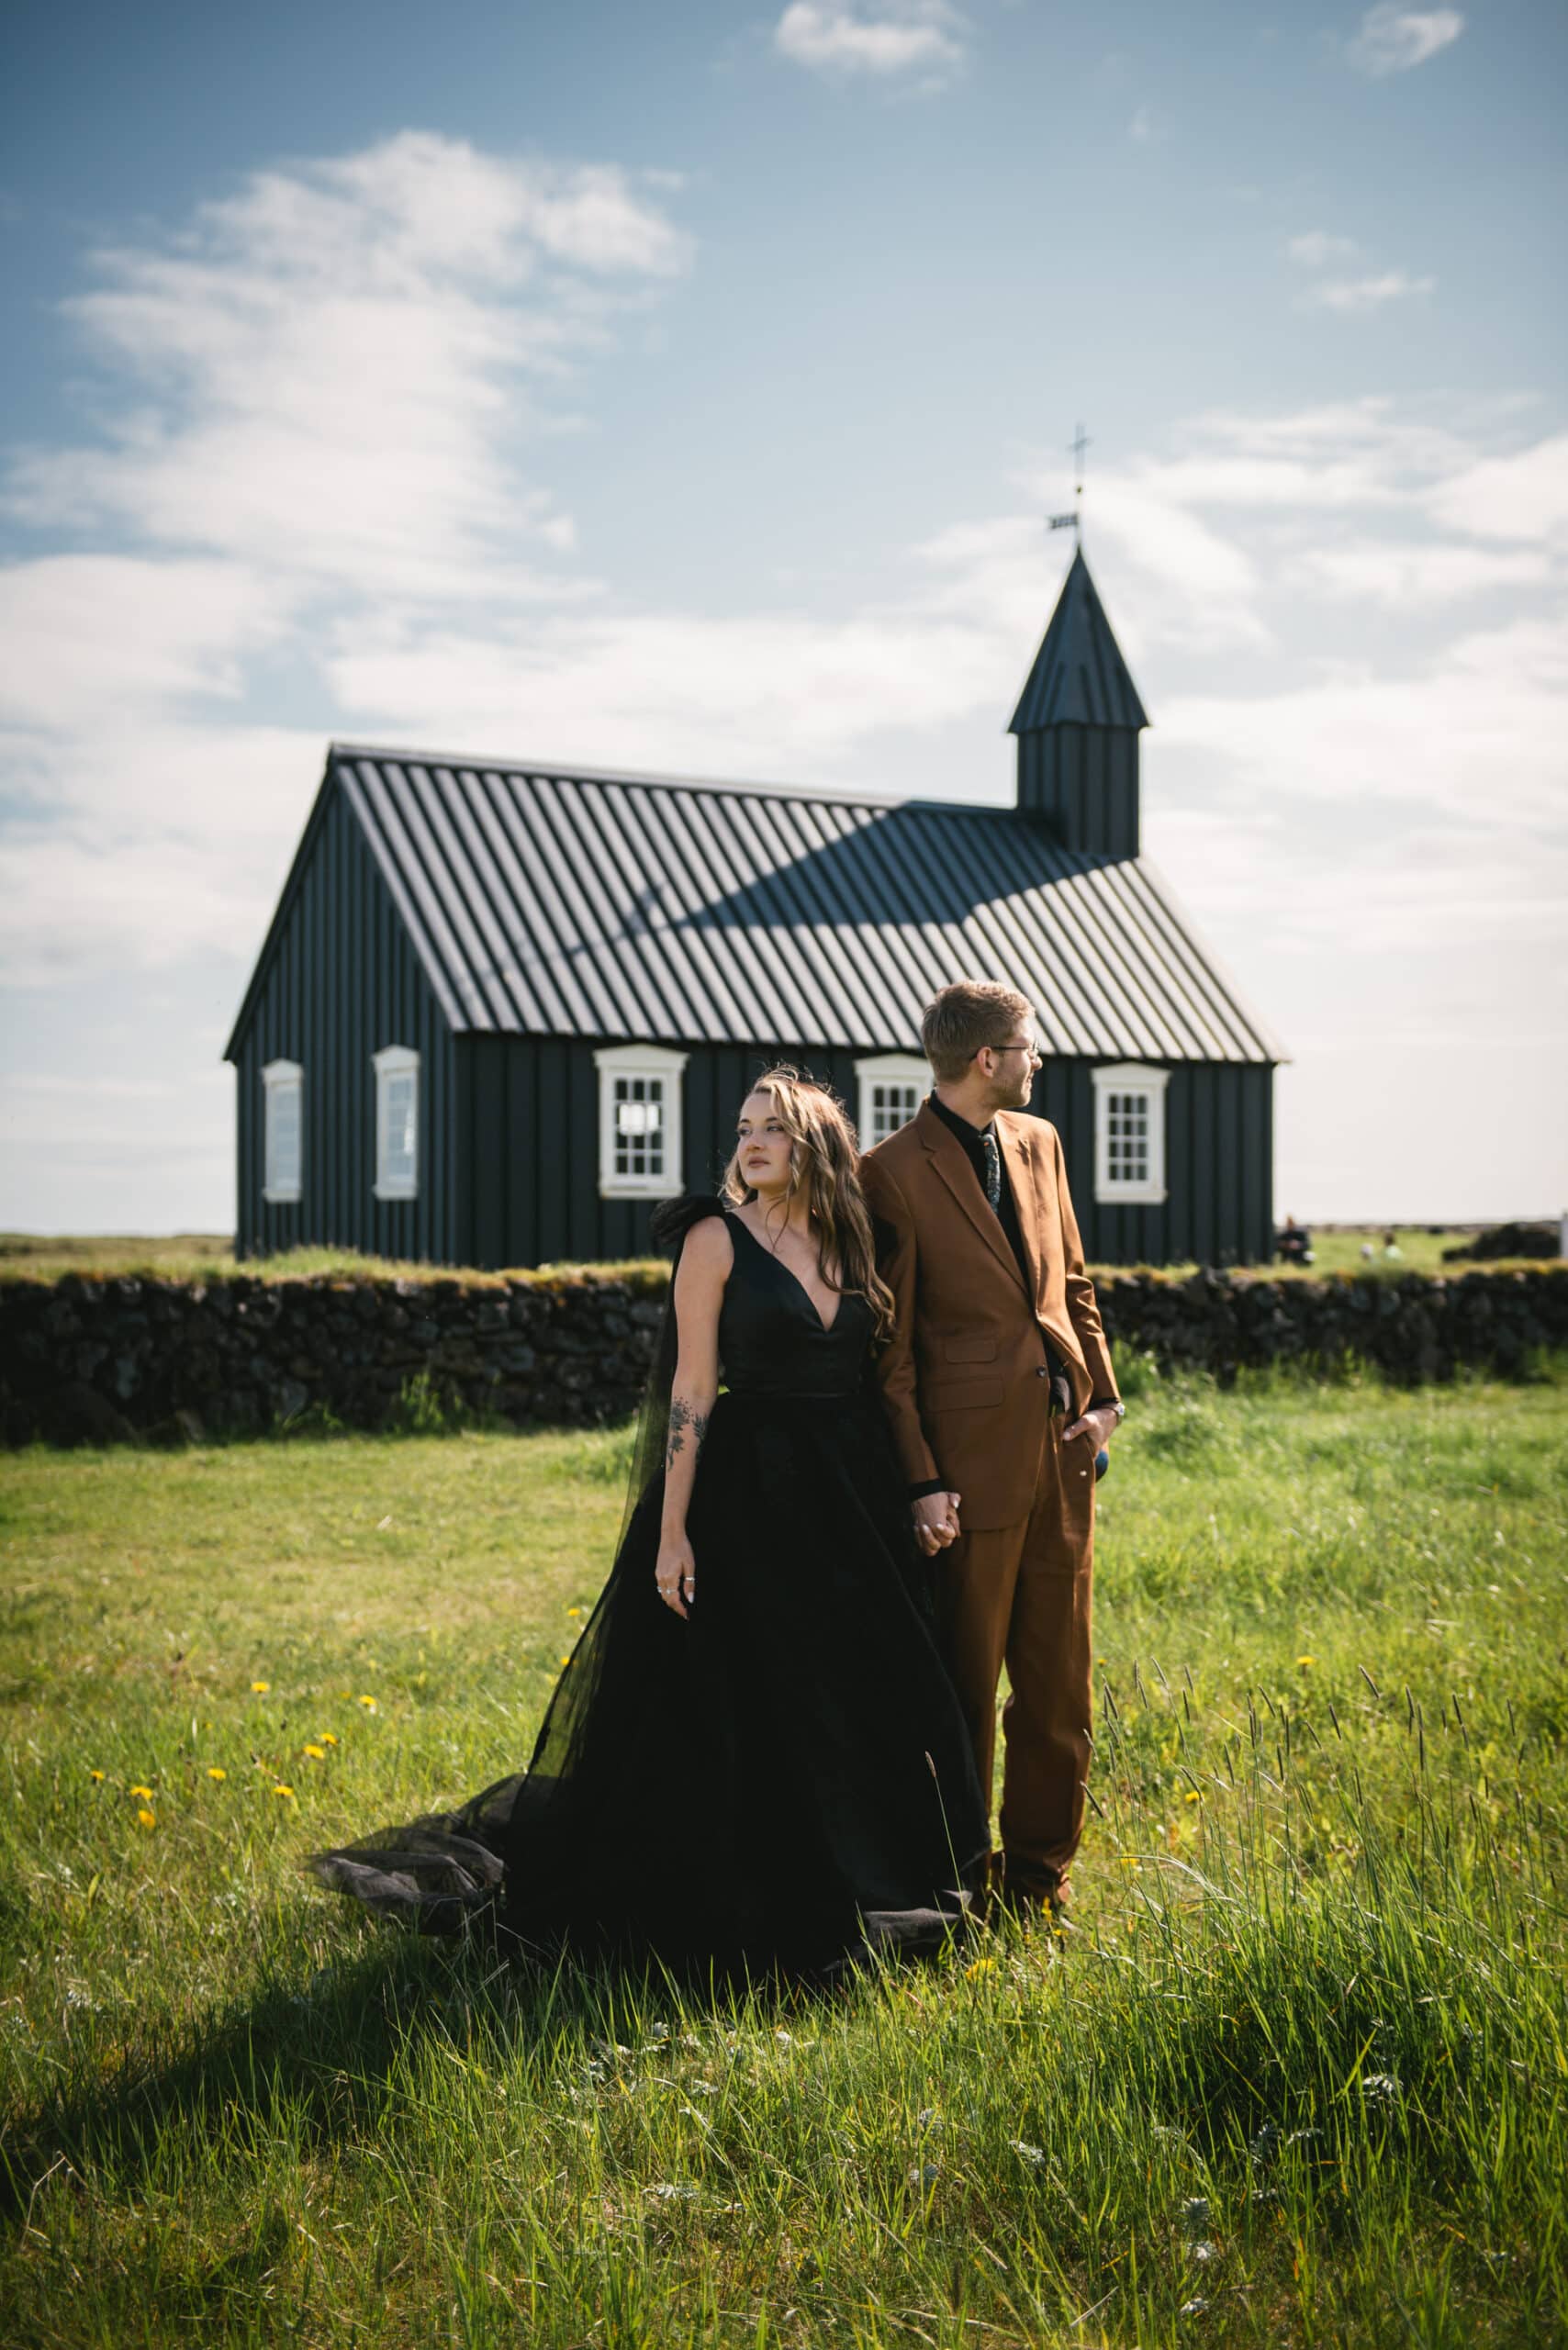 A romantic embrace captured in front of the historic Church of Budir during their Iceland Westfjords elopement.